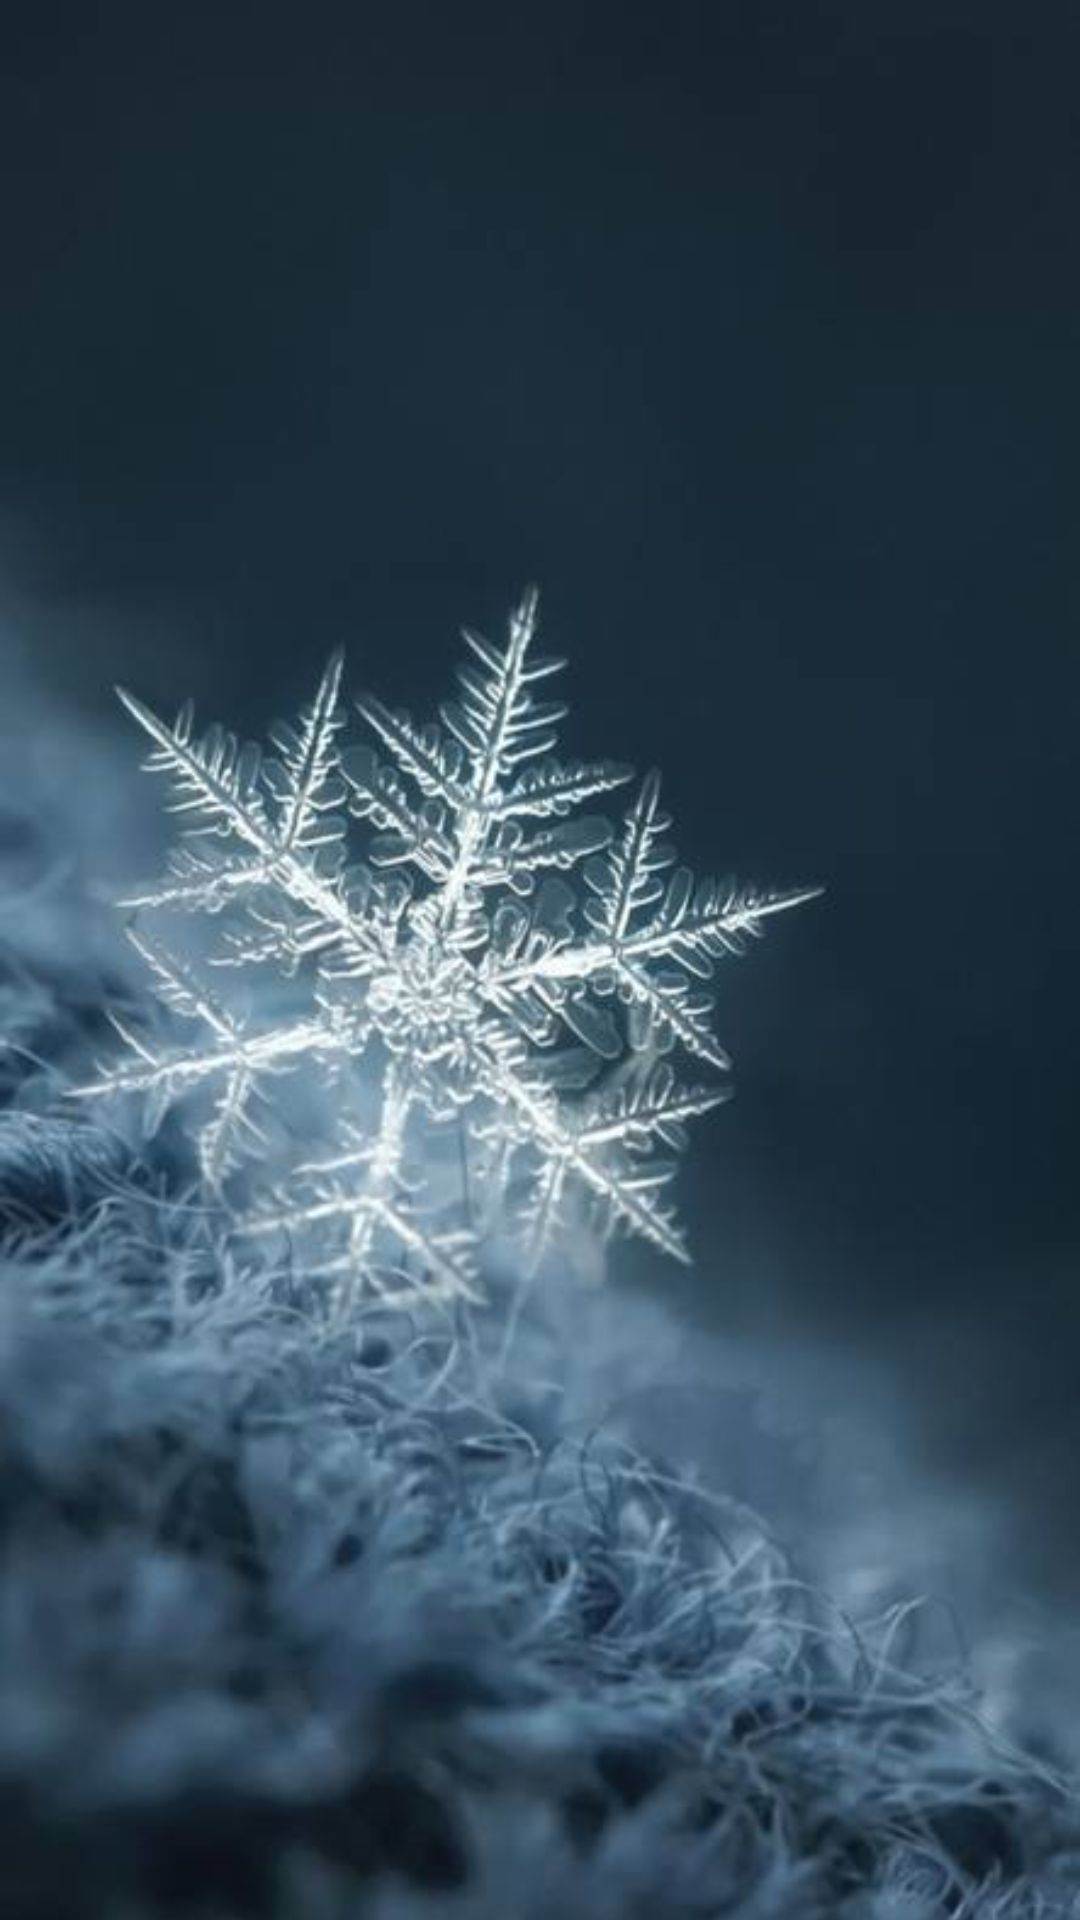 1080x1920 Snowflake Wallpapers Top 25 Best Snowflake Backgrounds Download